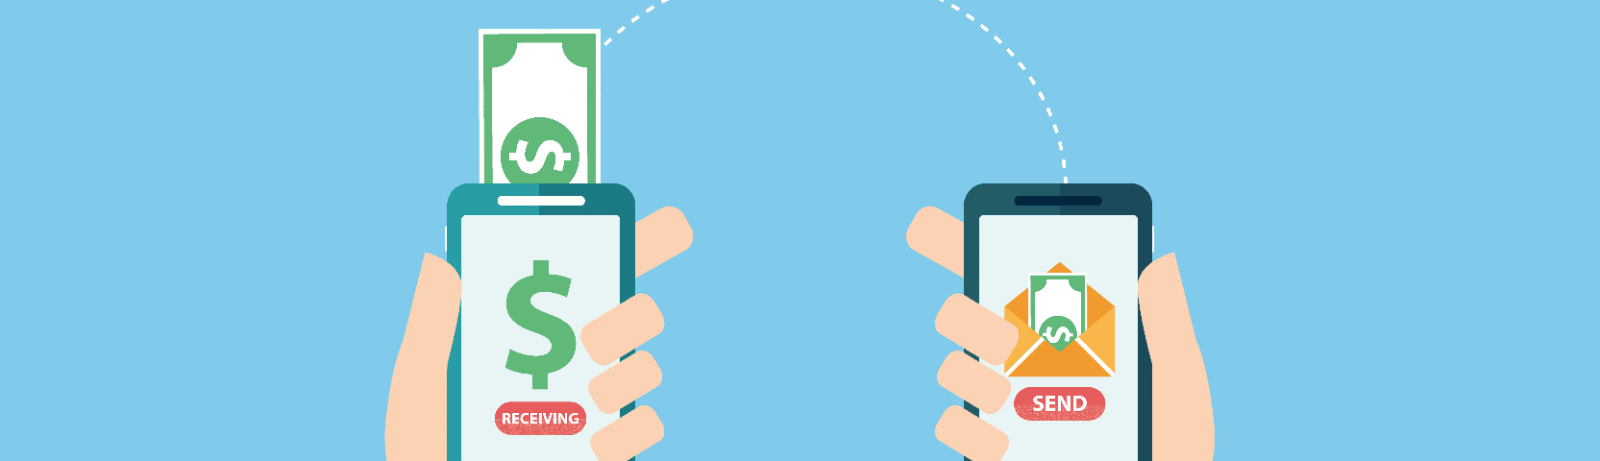 two mobile devices sharing money